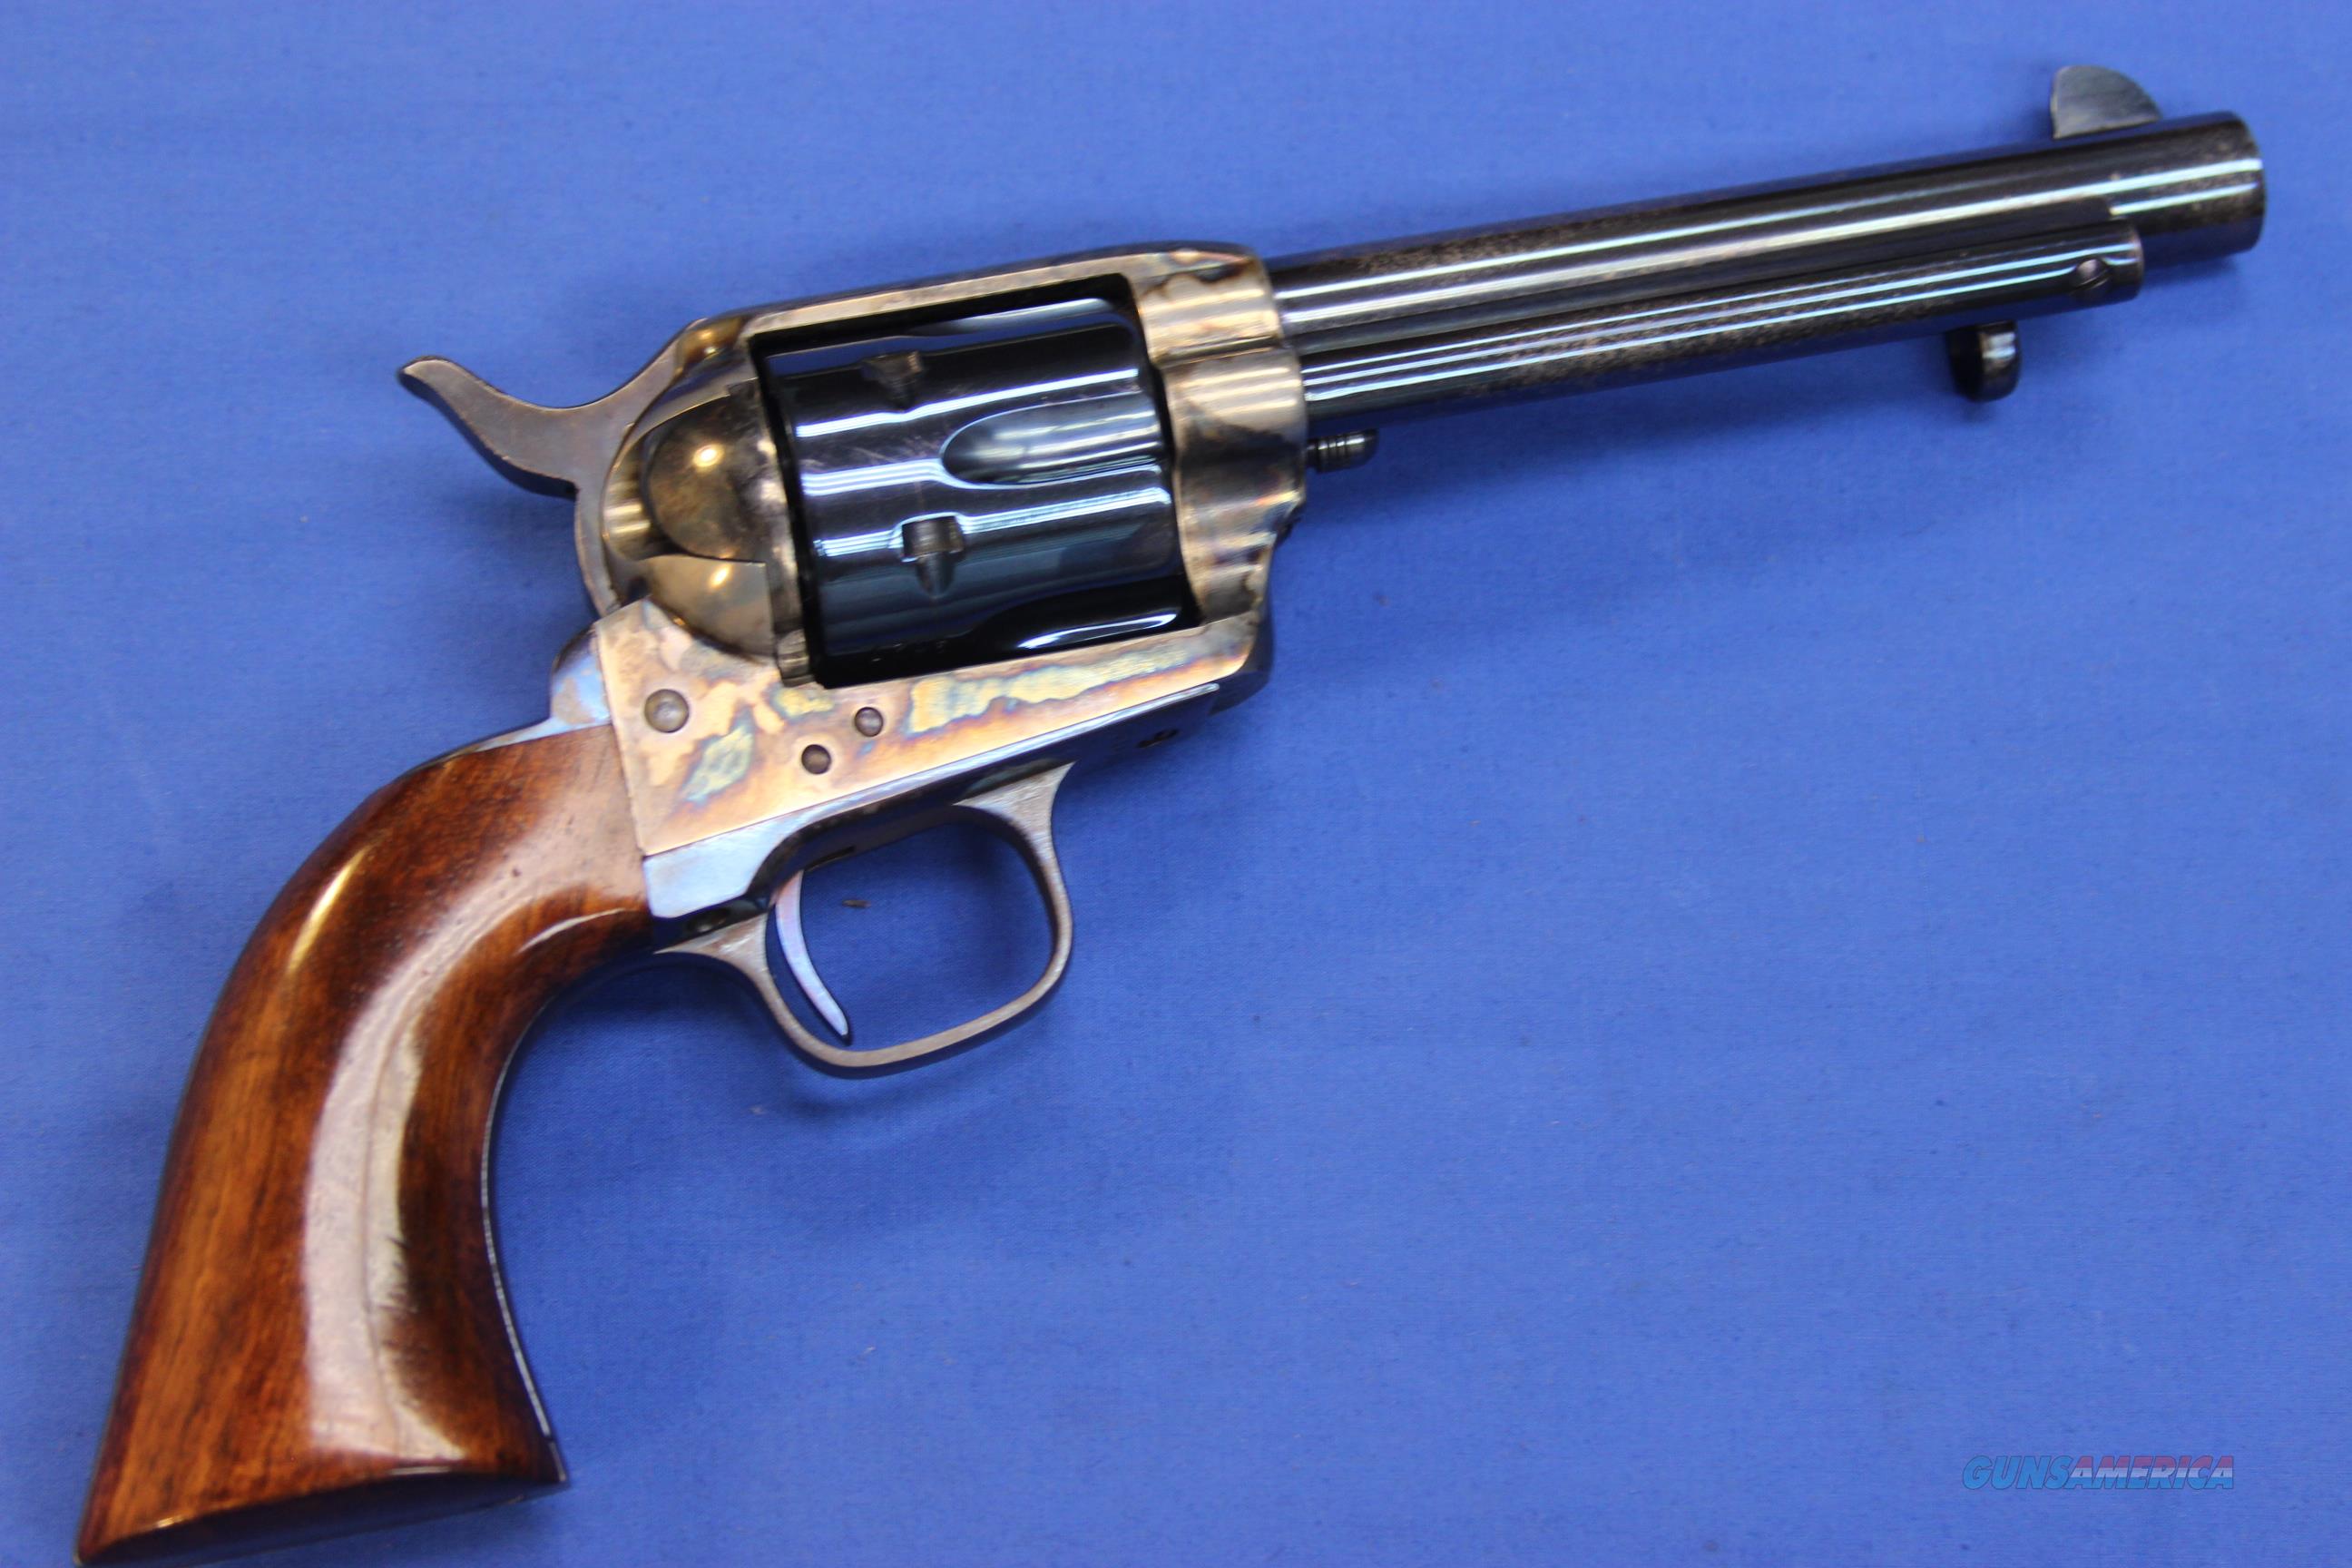 What is the value of a 1913 Blued Colt Cobra Revolver 38 Special?